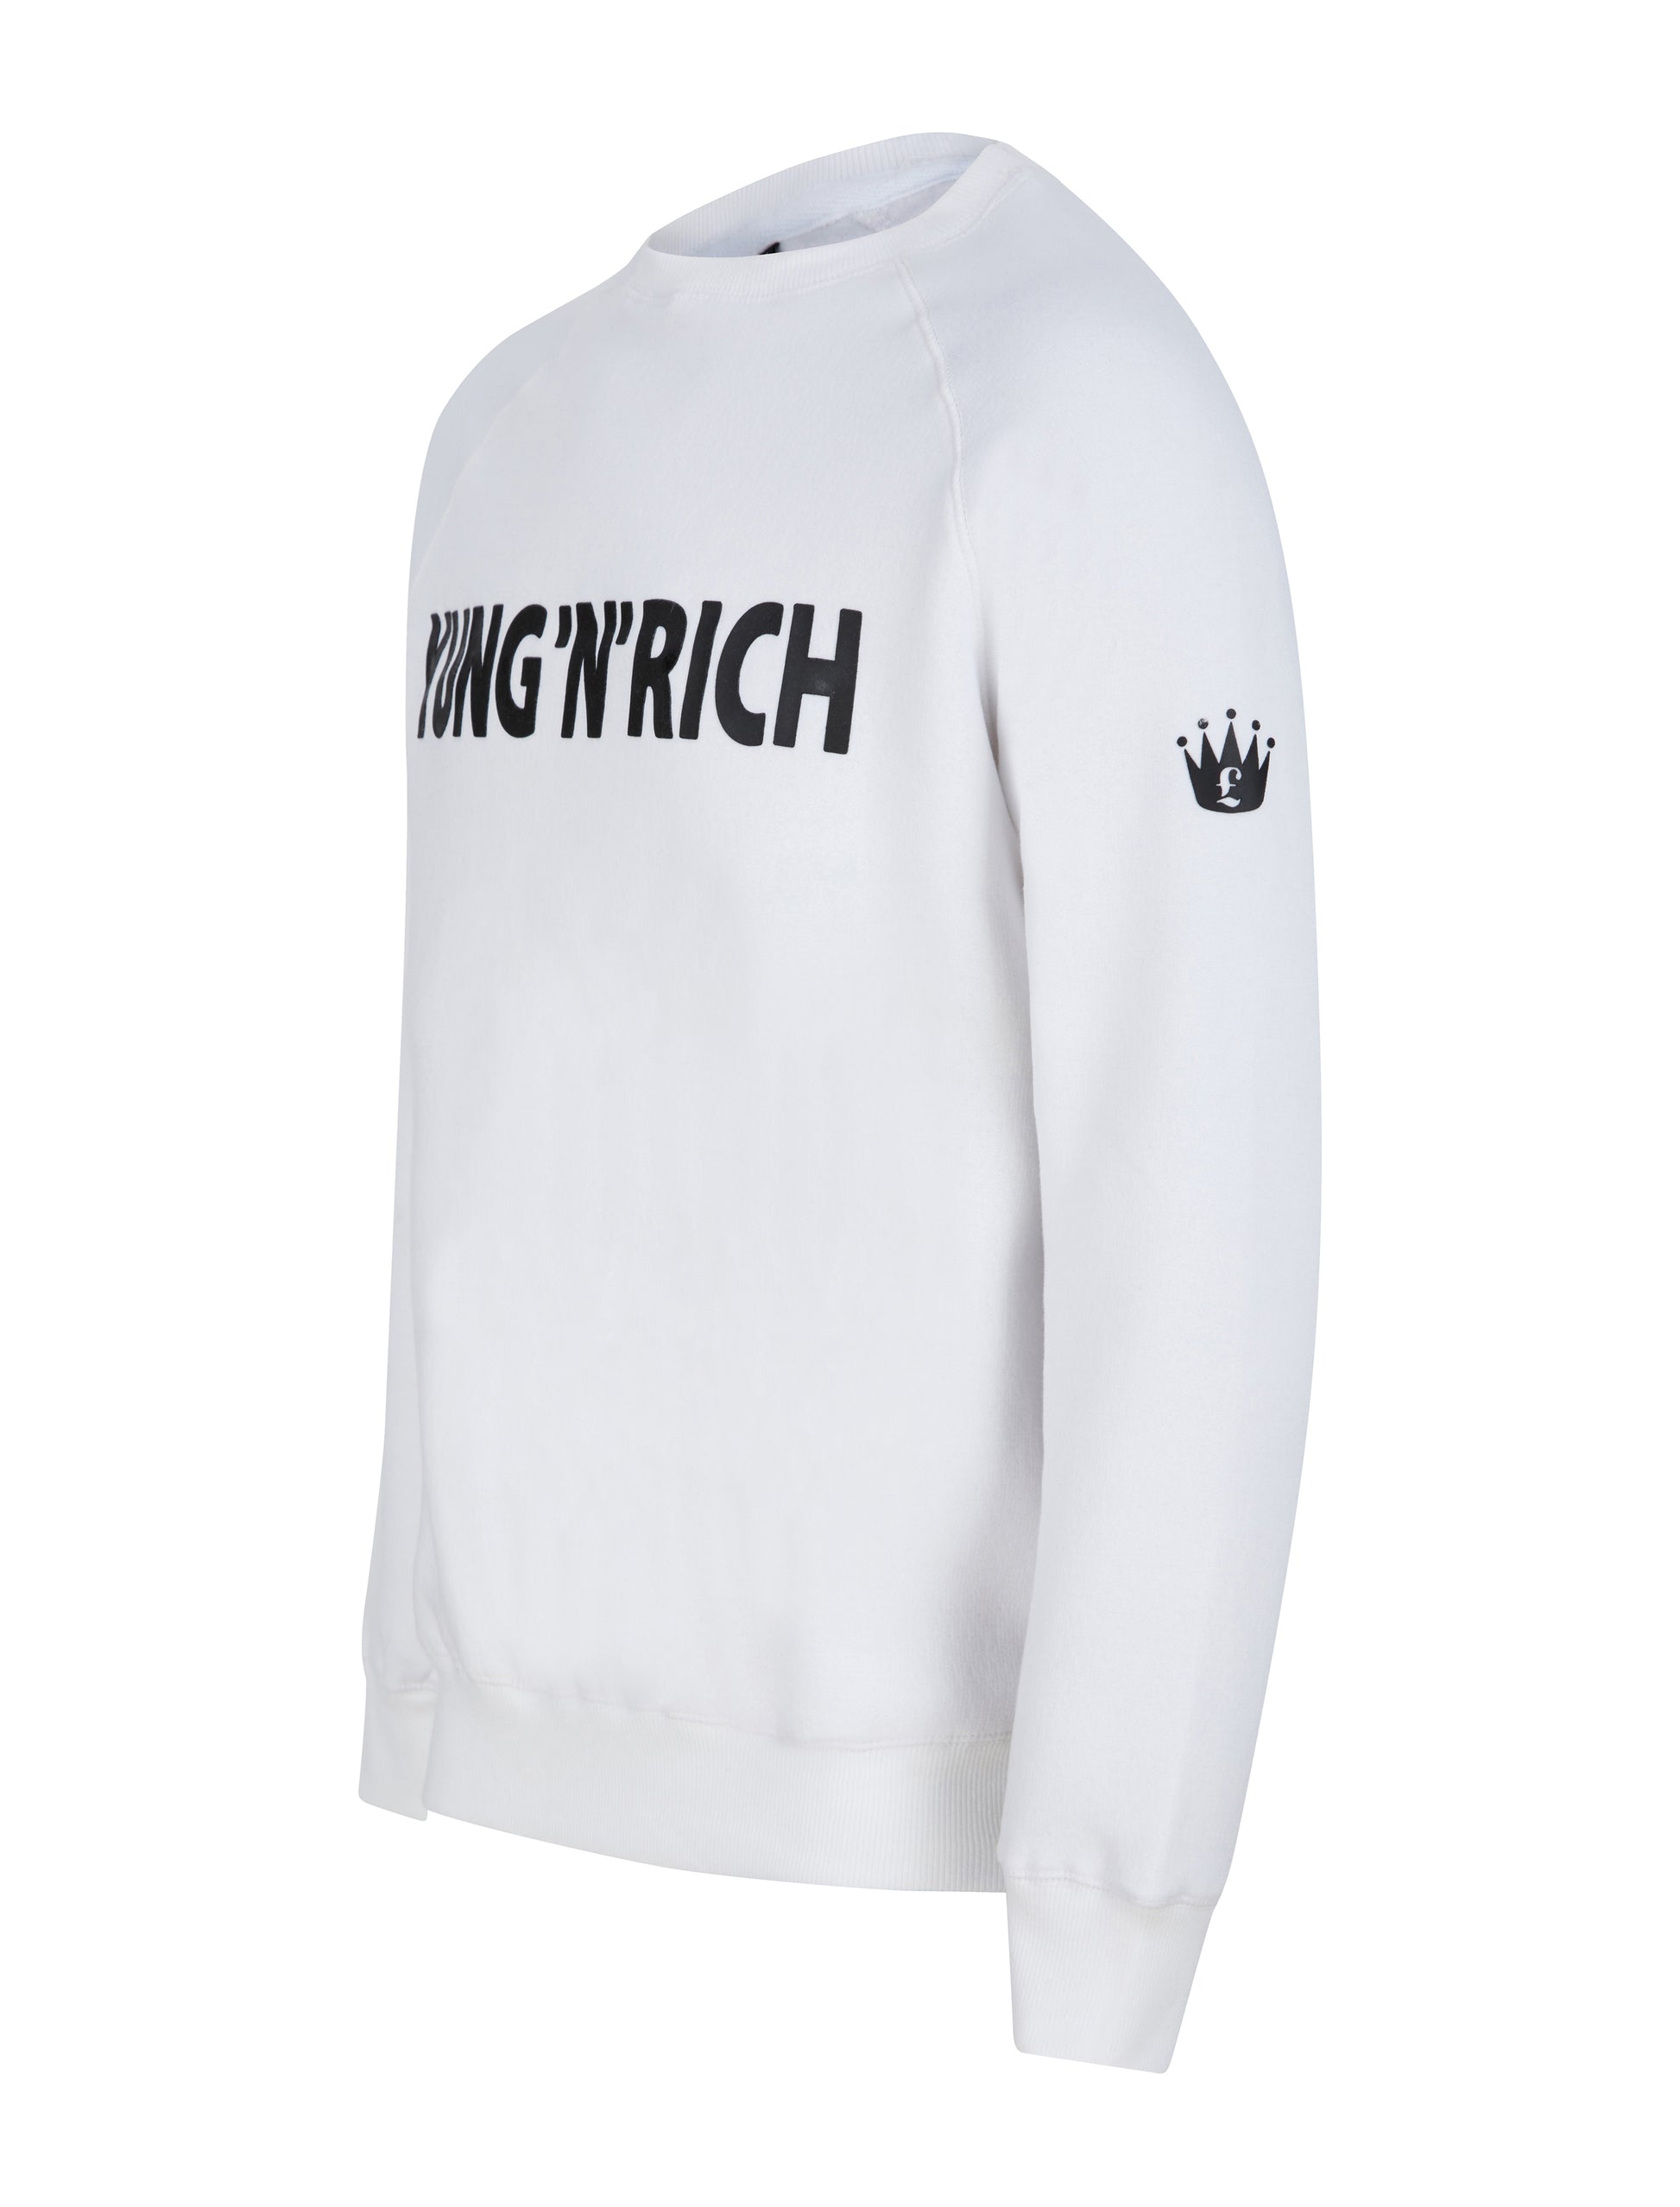 YUNGNRICH JUMPER SWEATER WHITE BLACK WORDING Apparel & Accessories > Clothing > hoodie > jumper > sweater